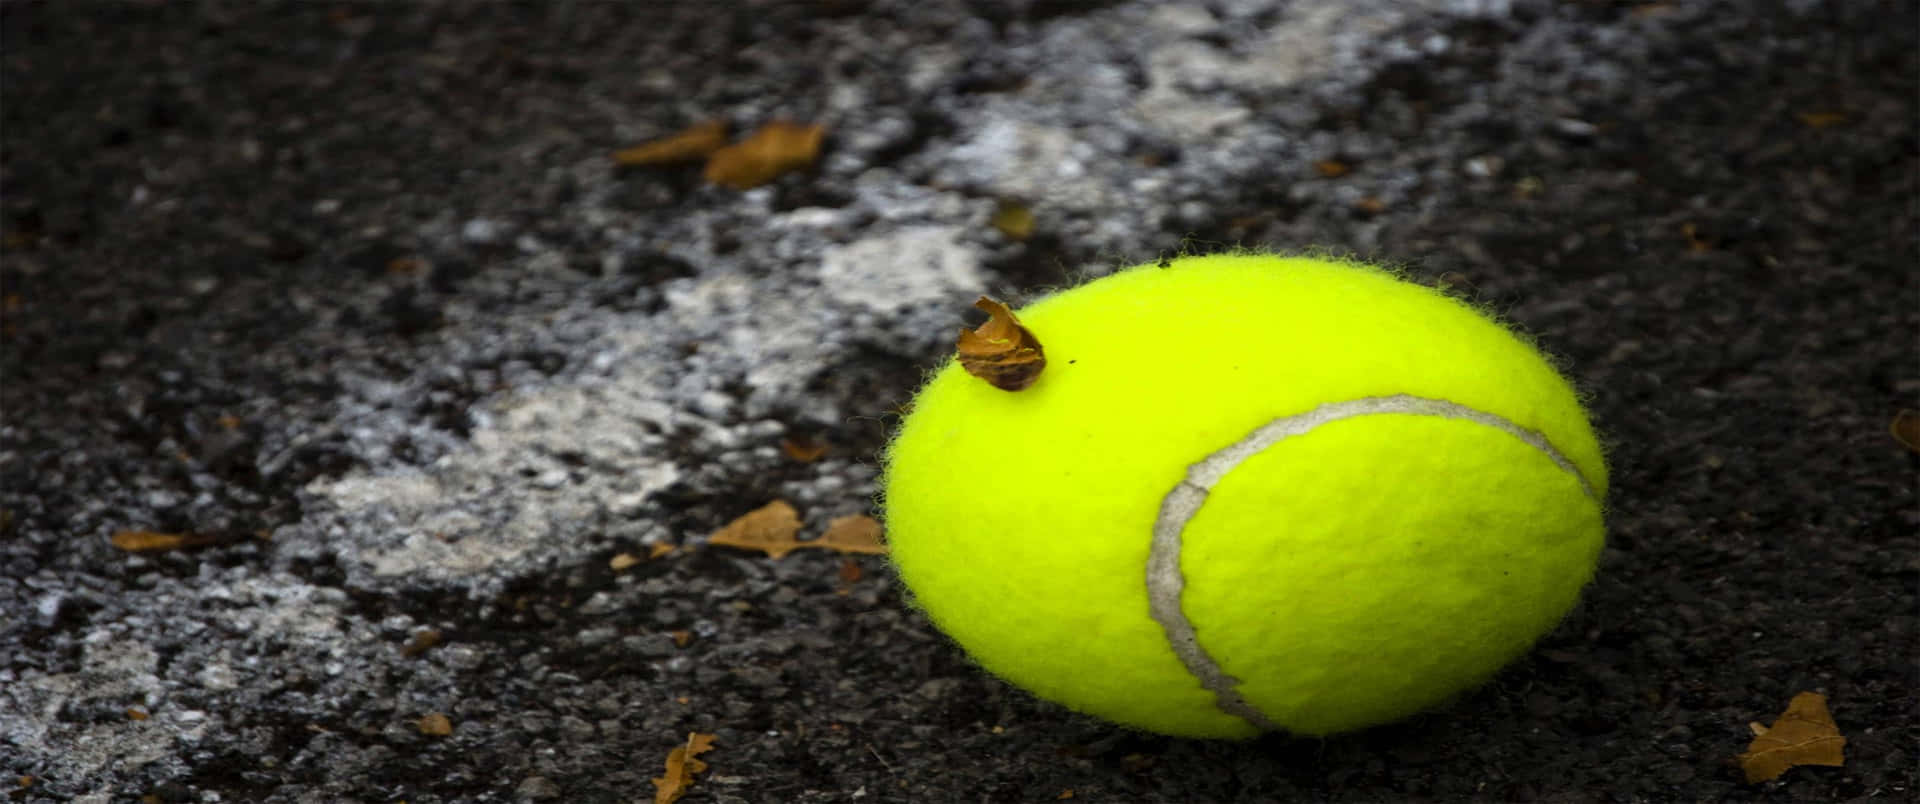 A Tennis Ball With A Bug On It